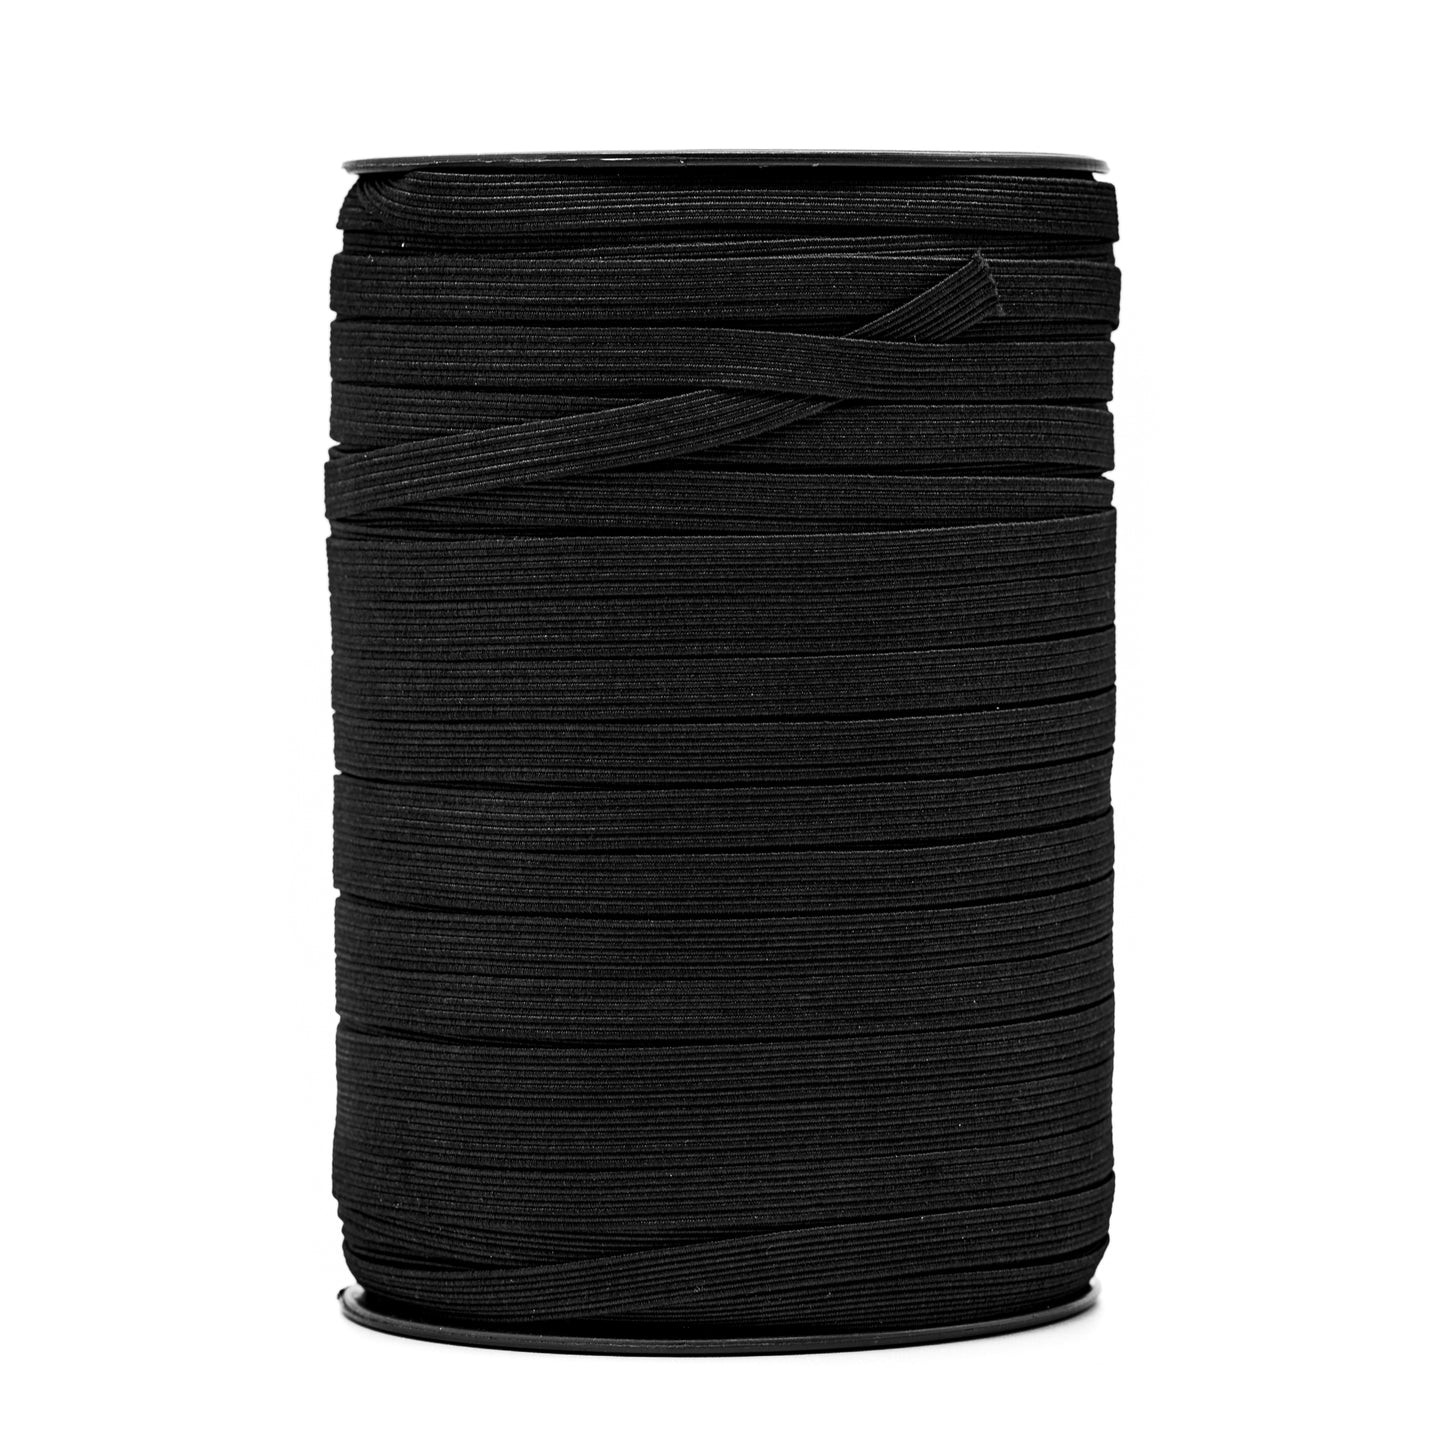 Elastic - Black (less than 1 inch width) - Roll (stand)